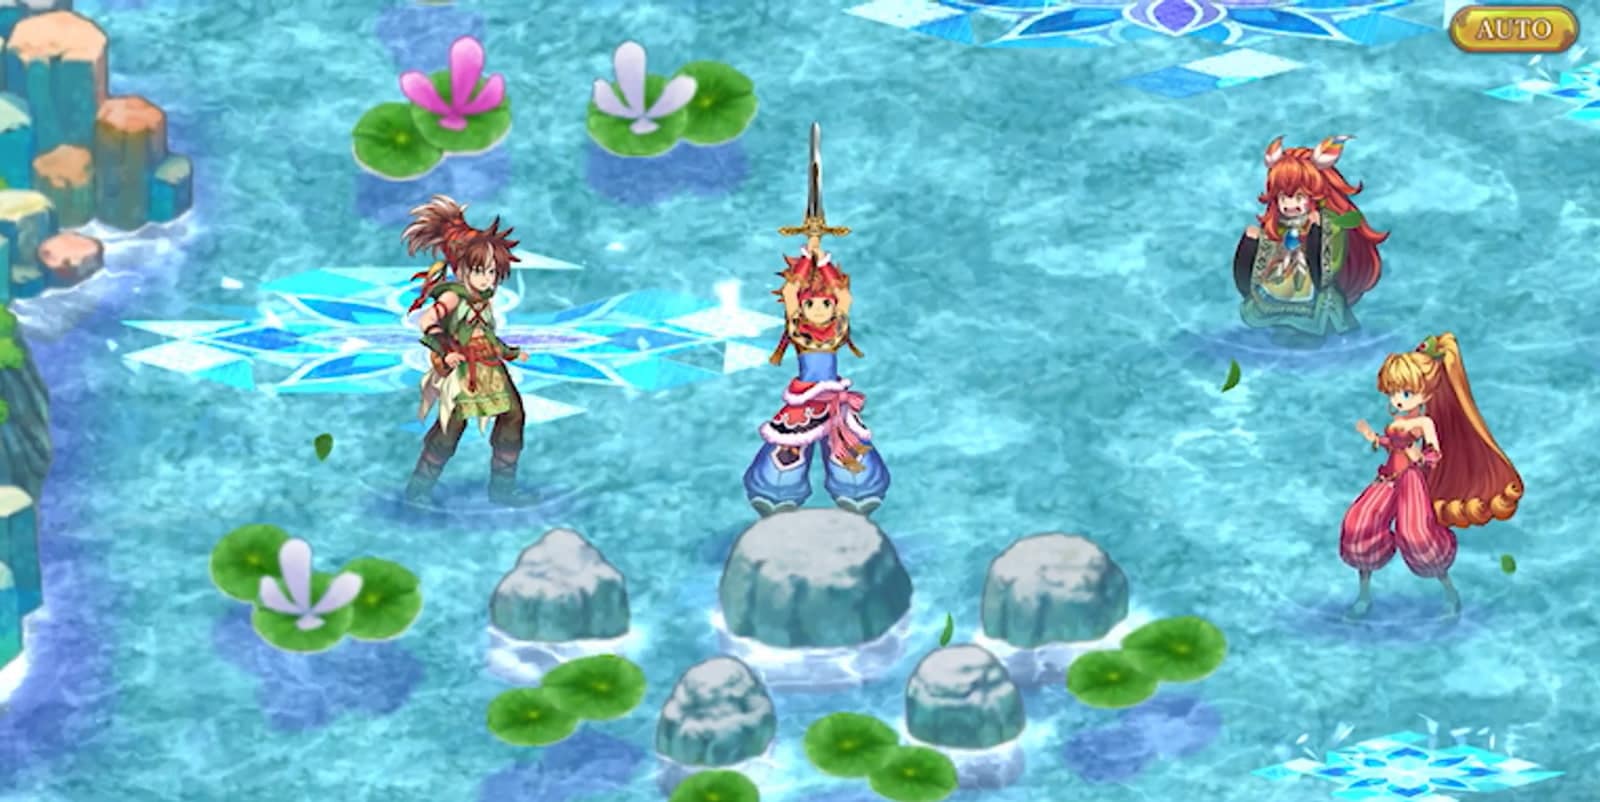 Square Enix Echoes of Mana